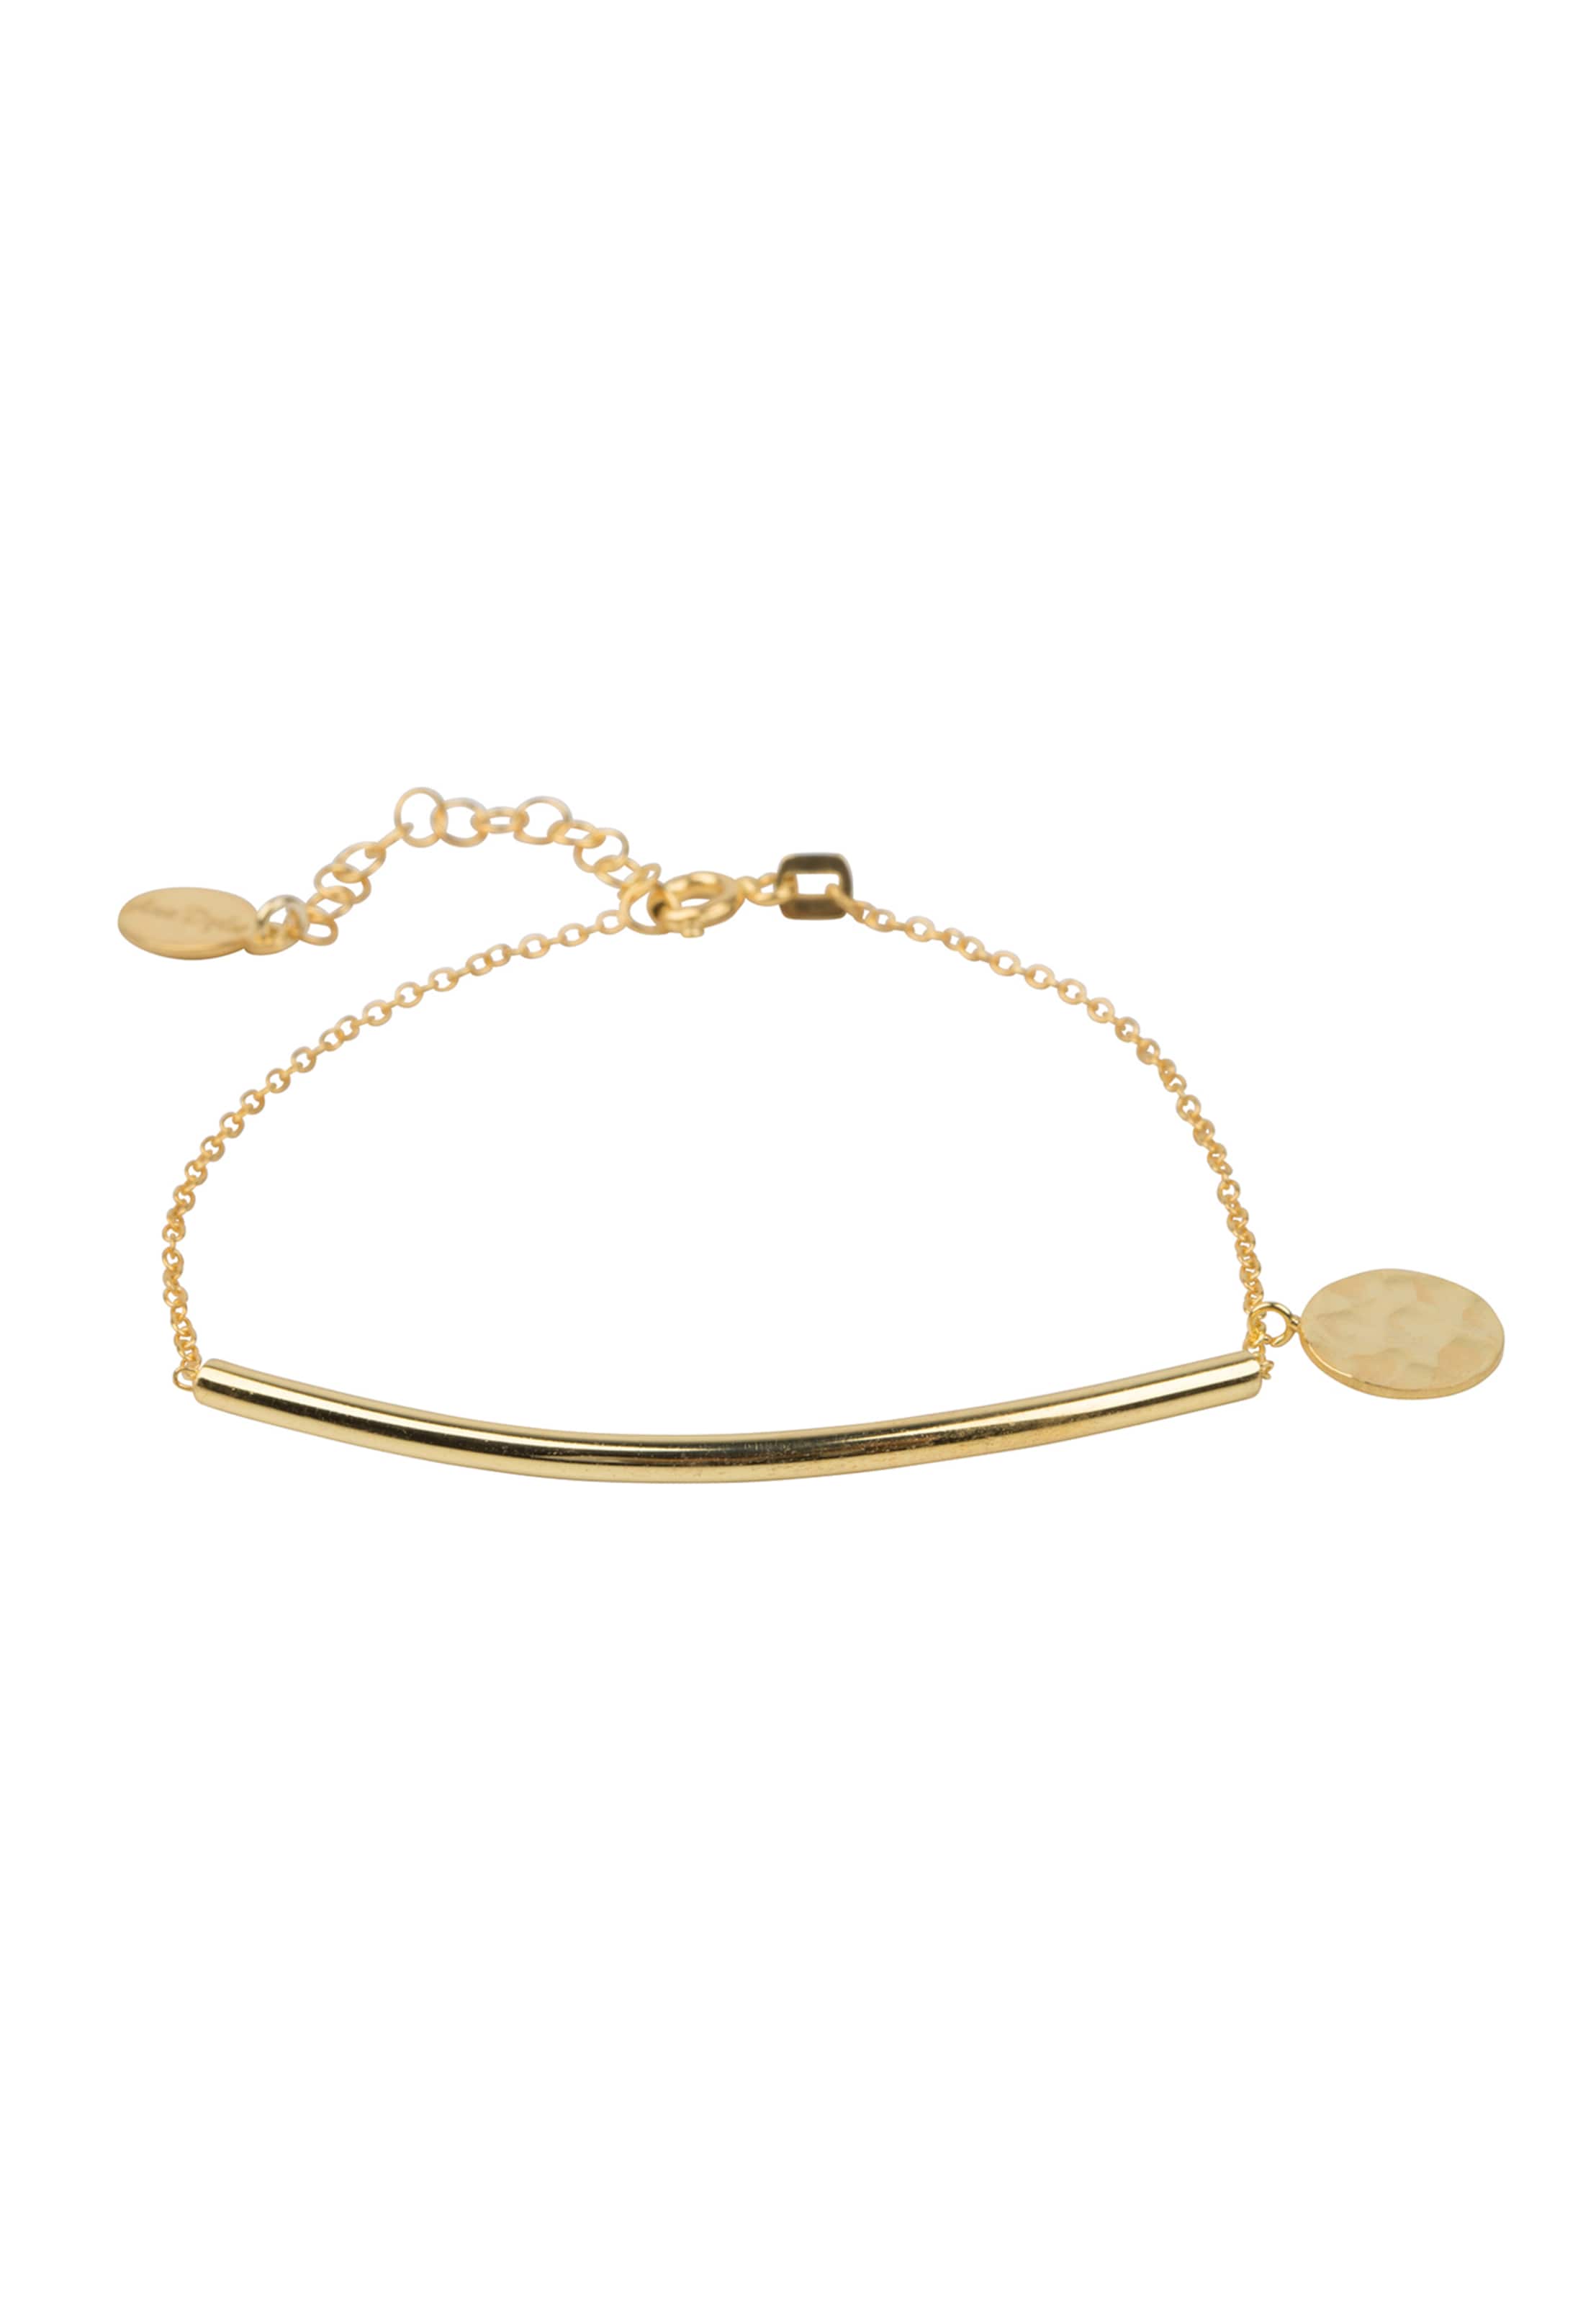 Ana Dyla Armband in Gold 